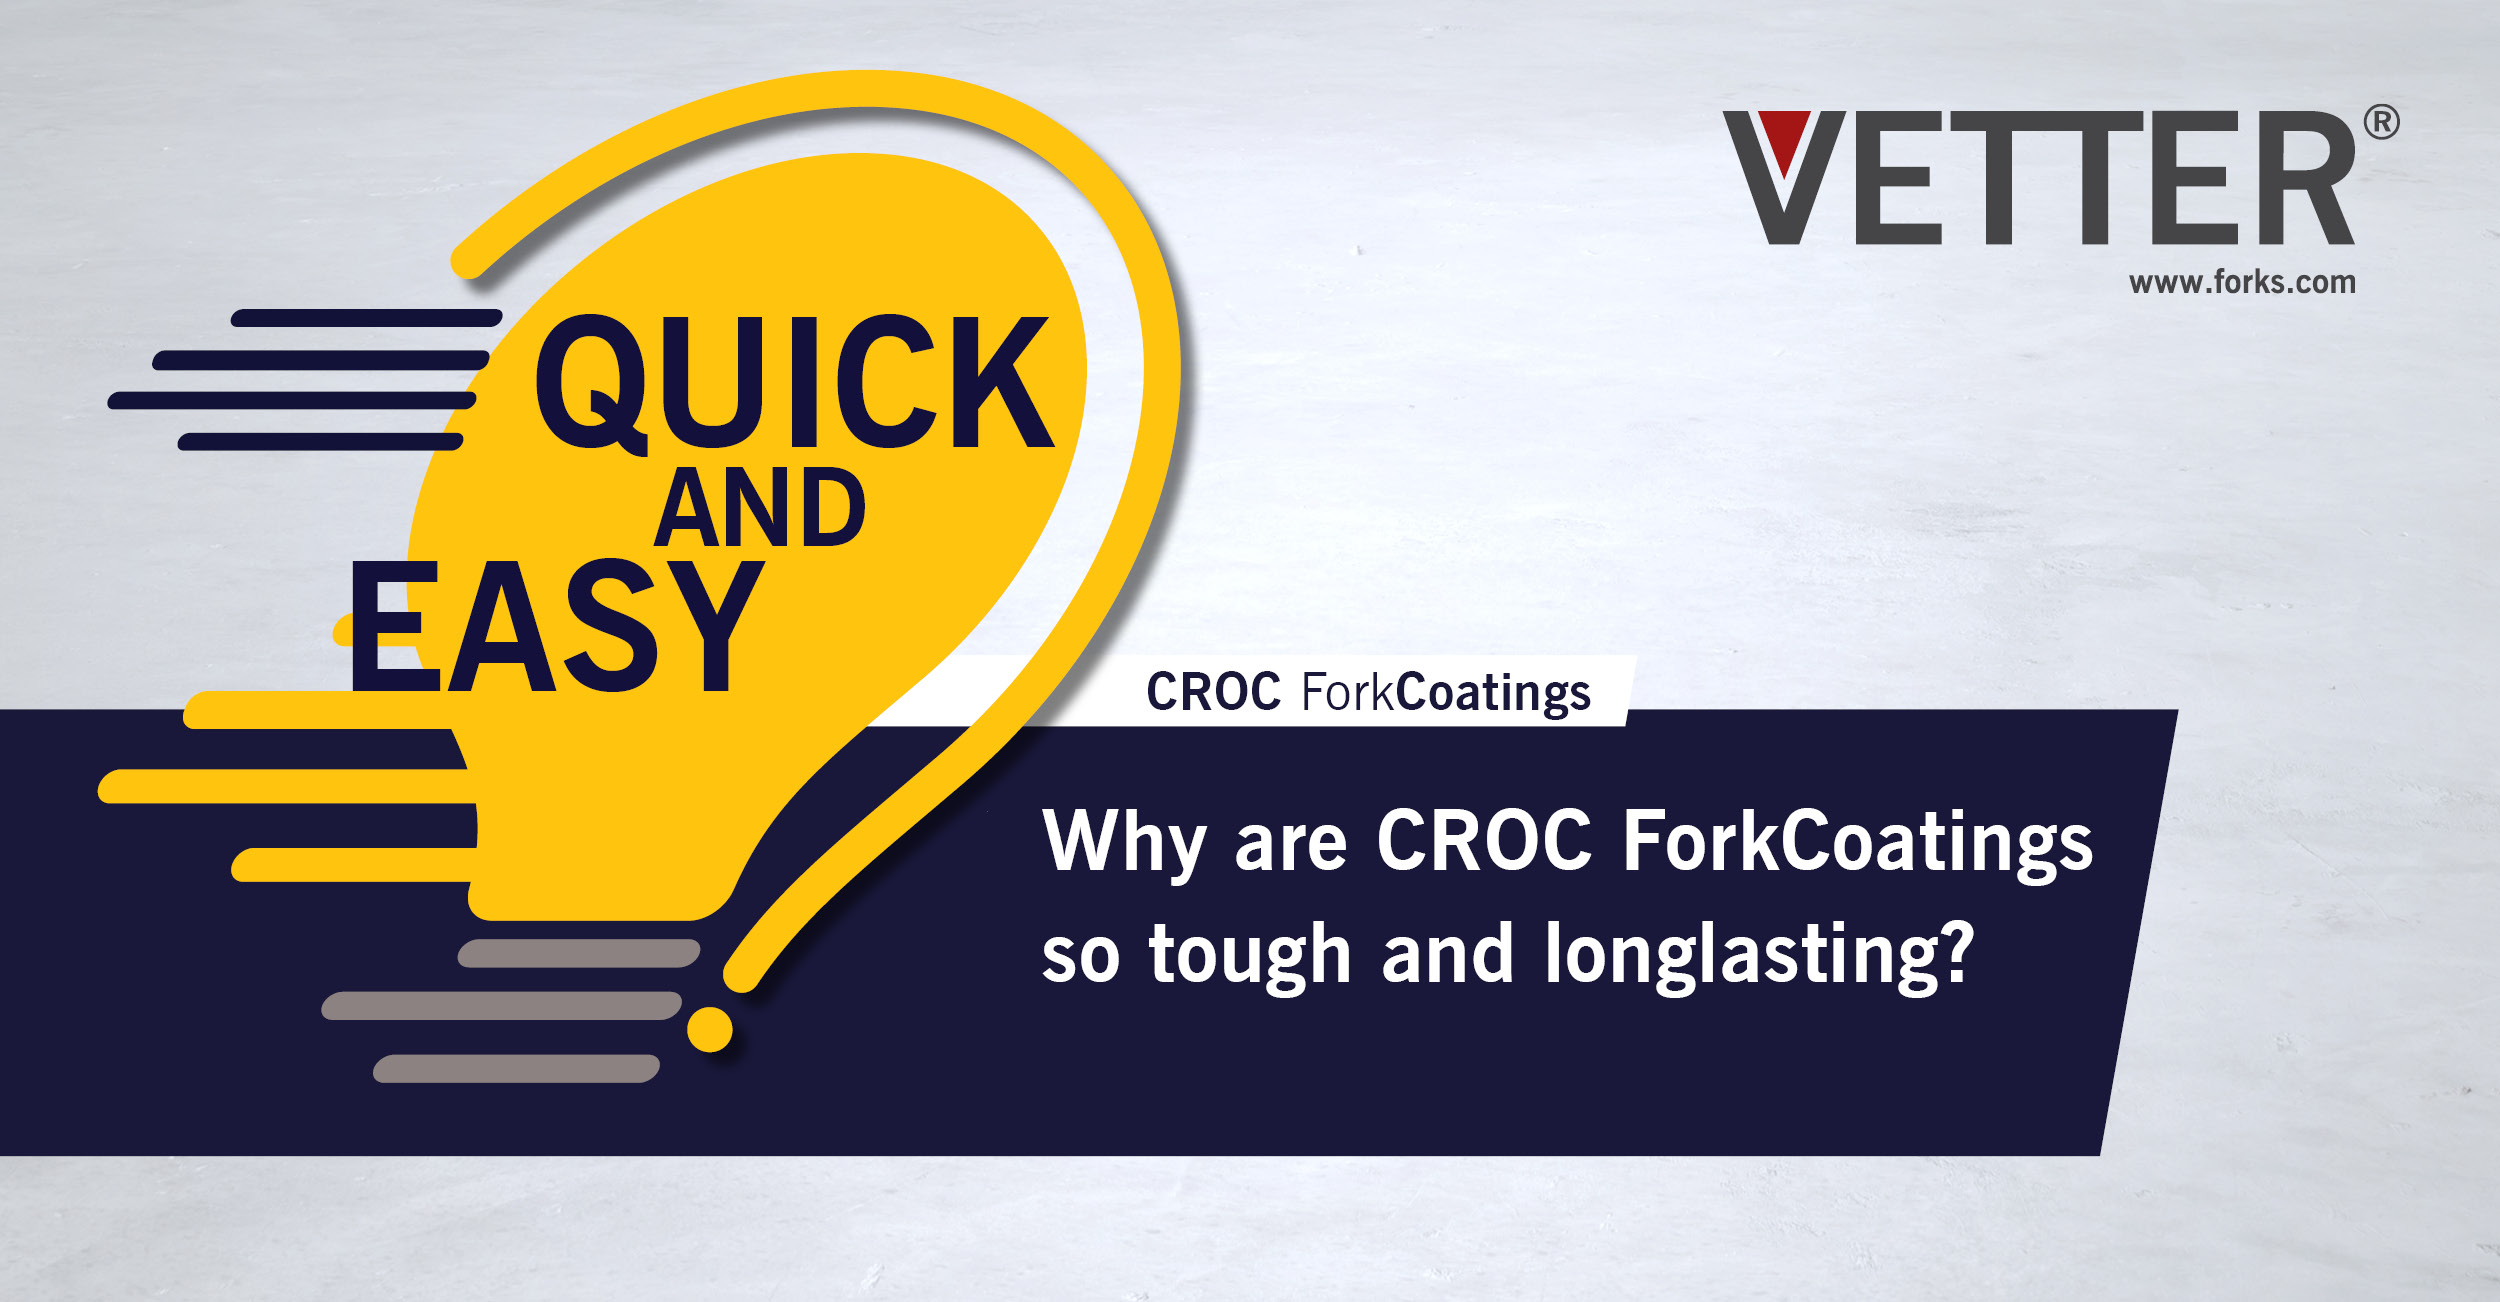 VETTER Quick and Easy: CROC fork coatings